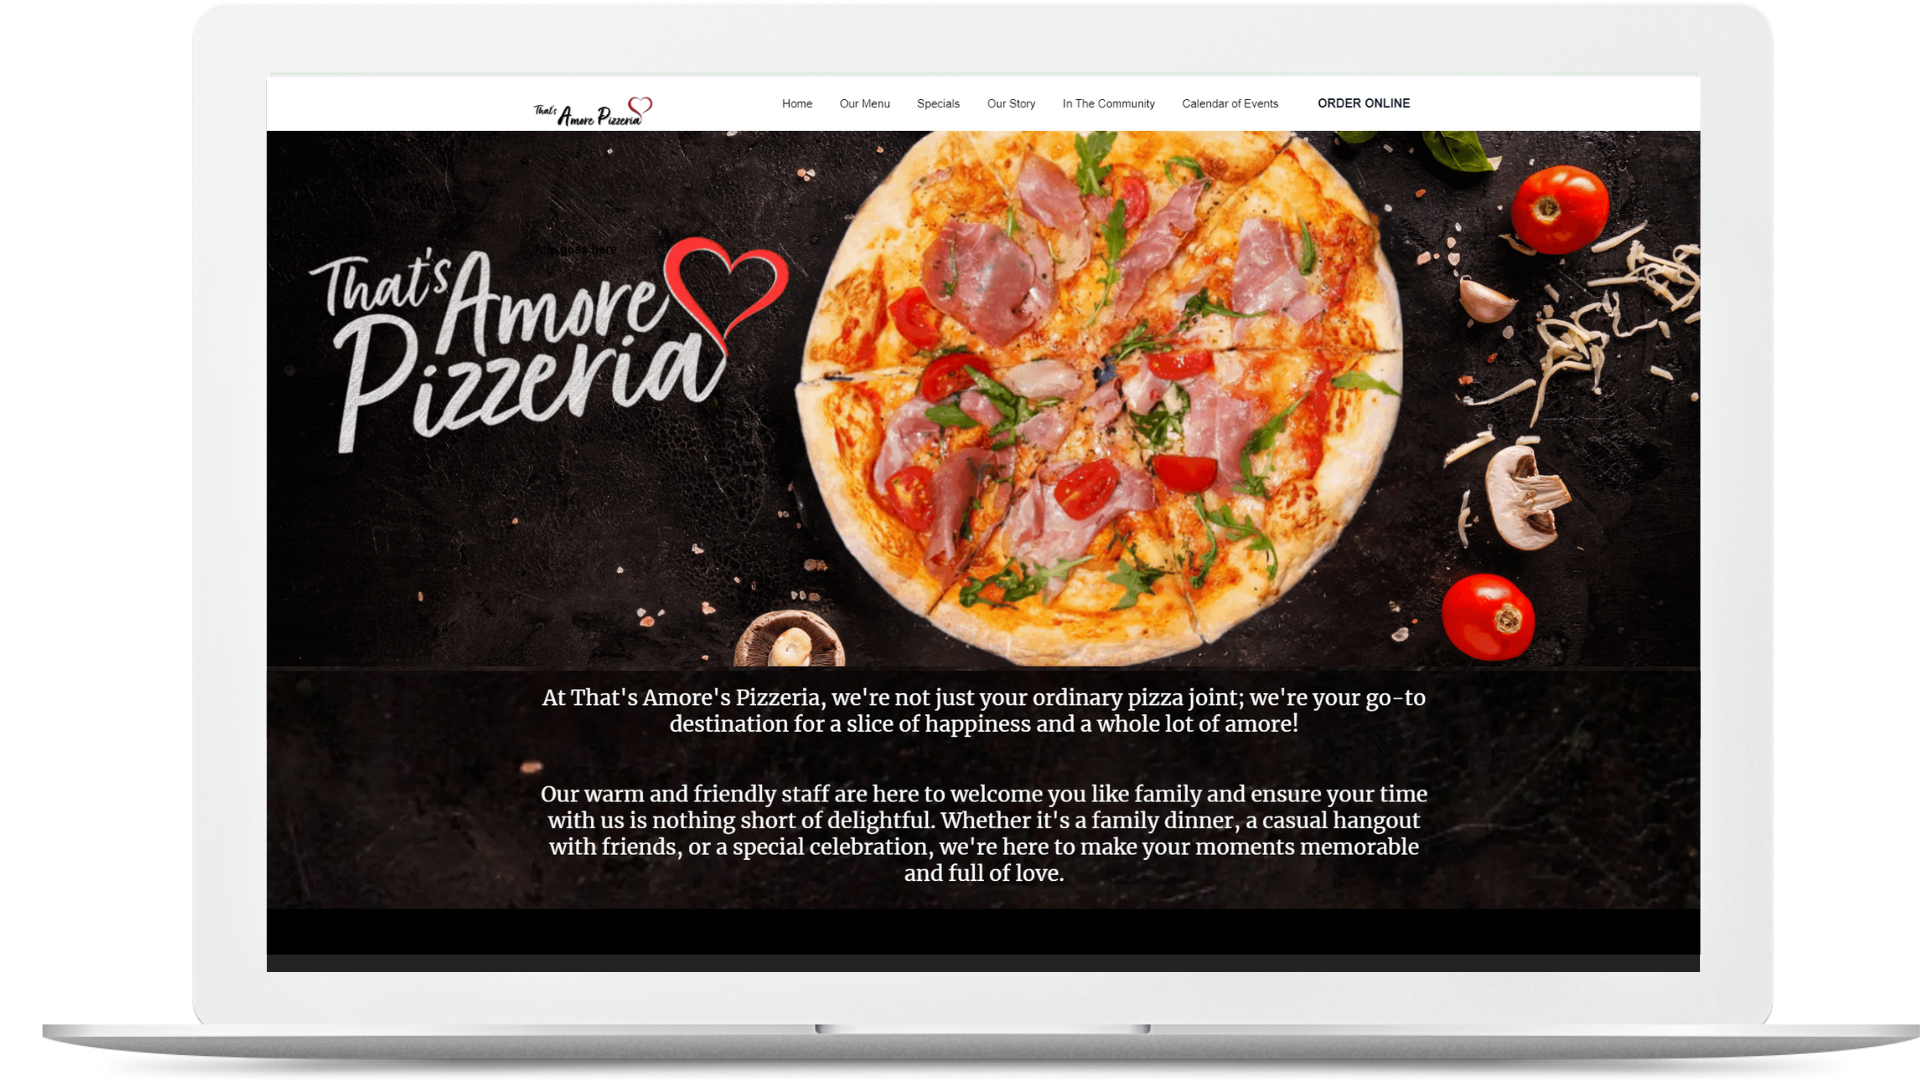 That's Amore Pizza